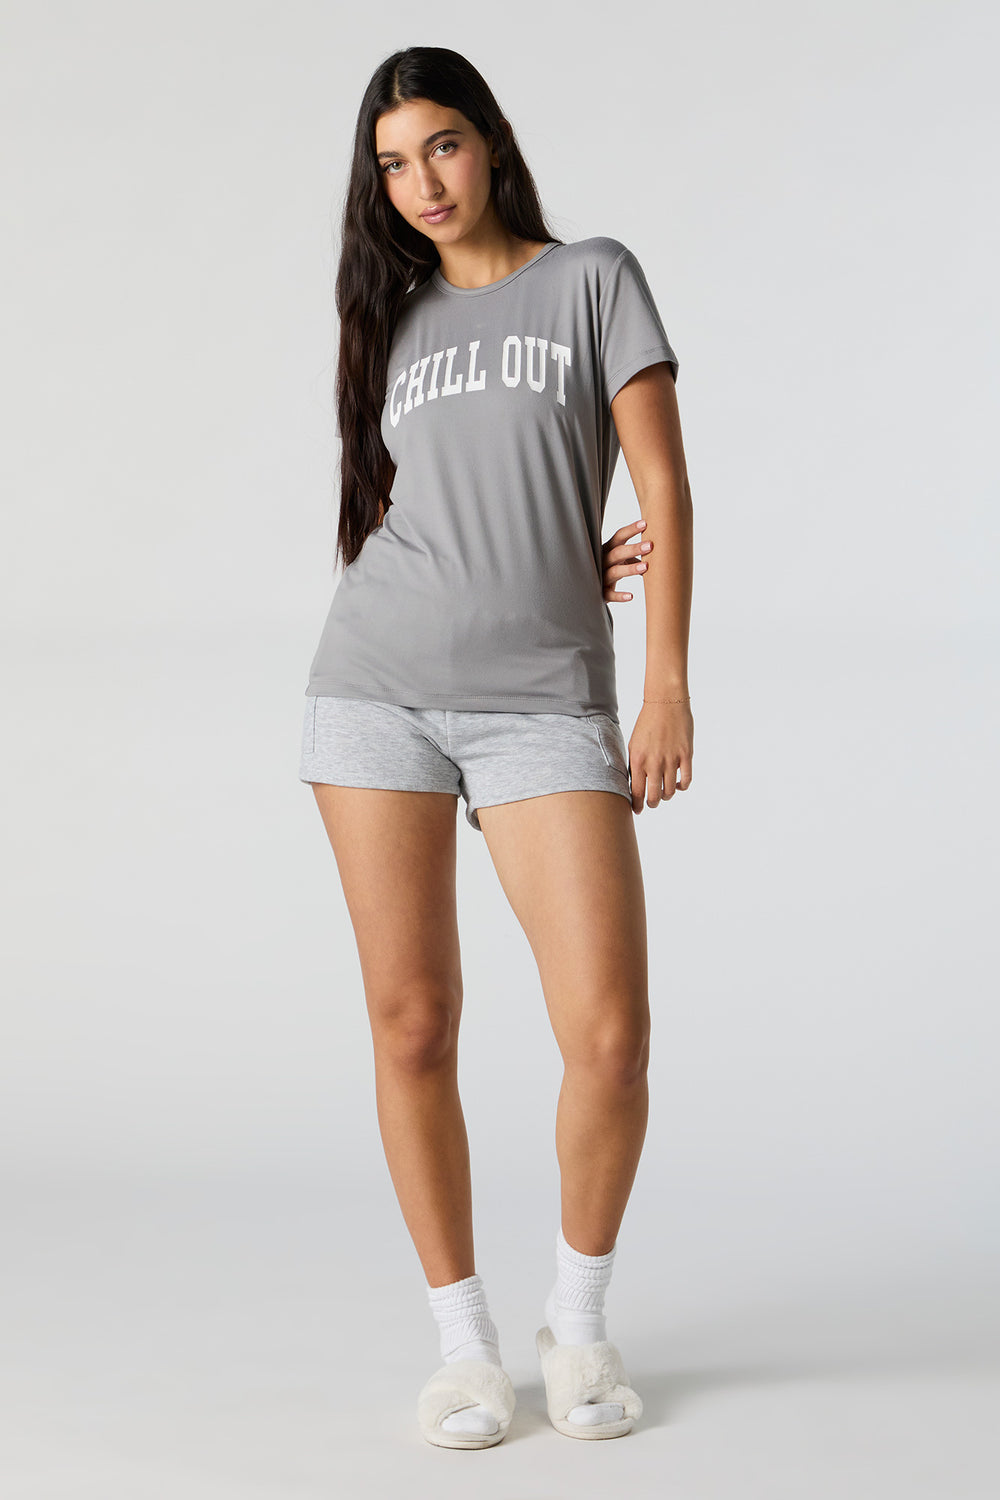 Chill Out Graphic Pajama T-Shirt Chill Out Graphic Pajama T-Shirt 3